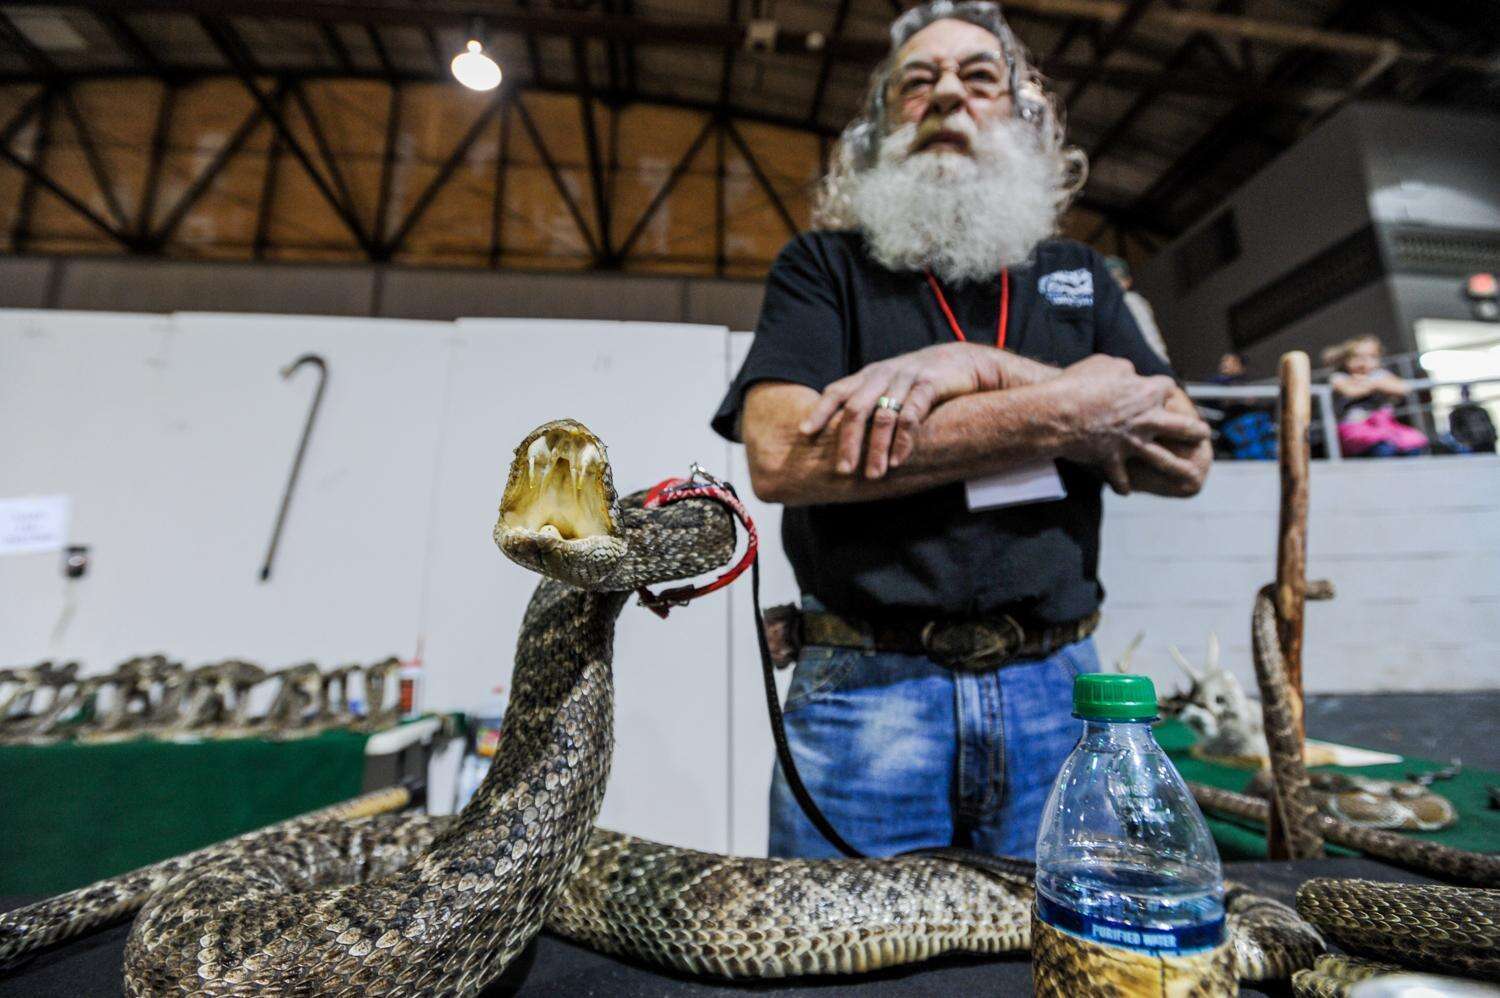 A dead rattlesnake at the Sweetwater snake roundup festival